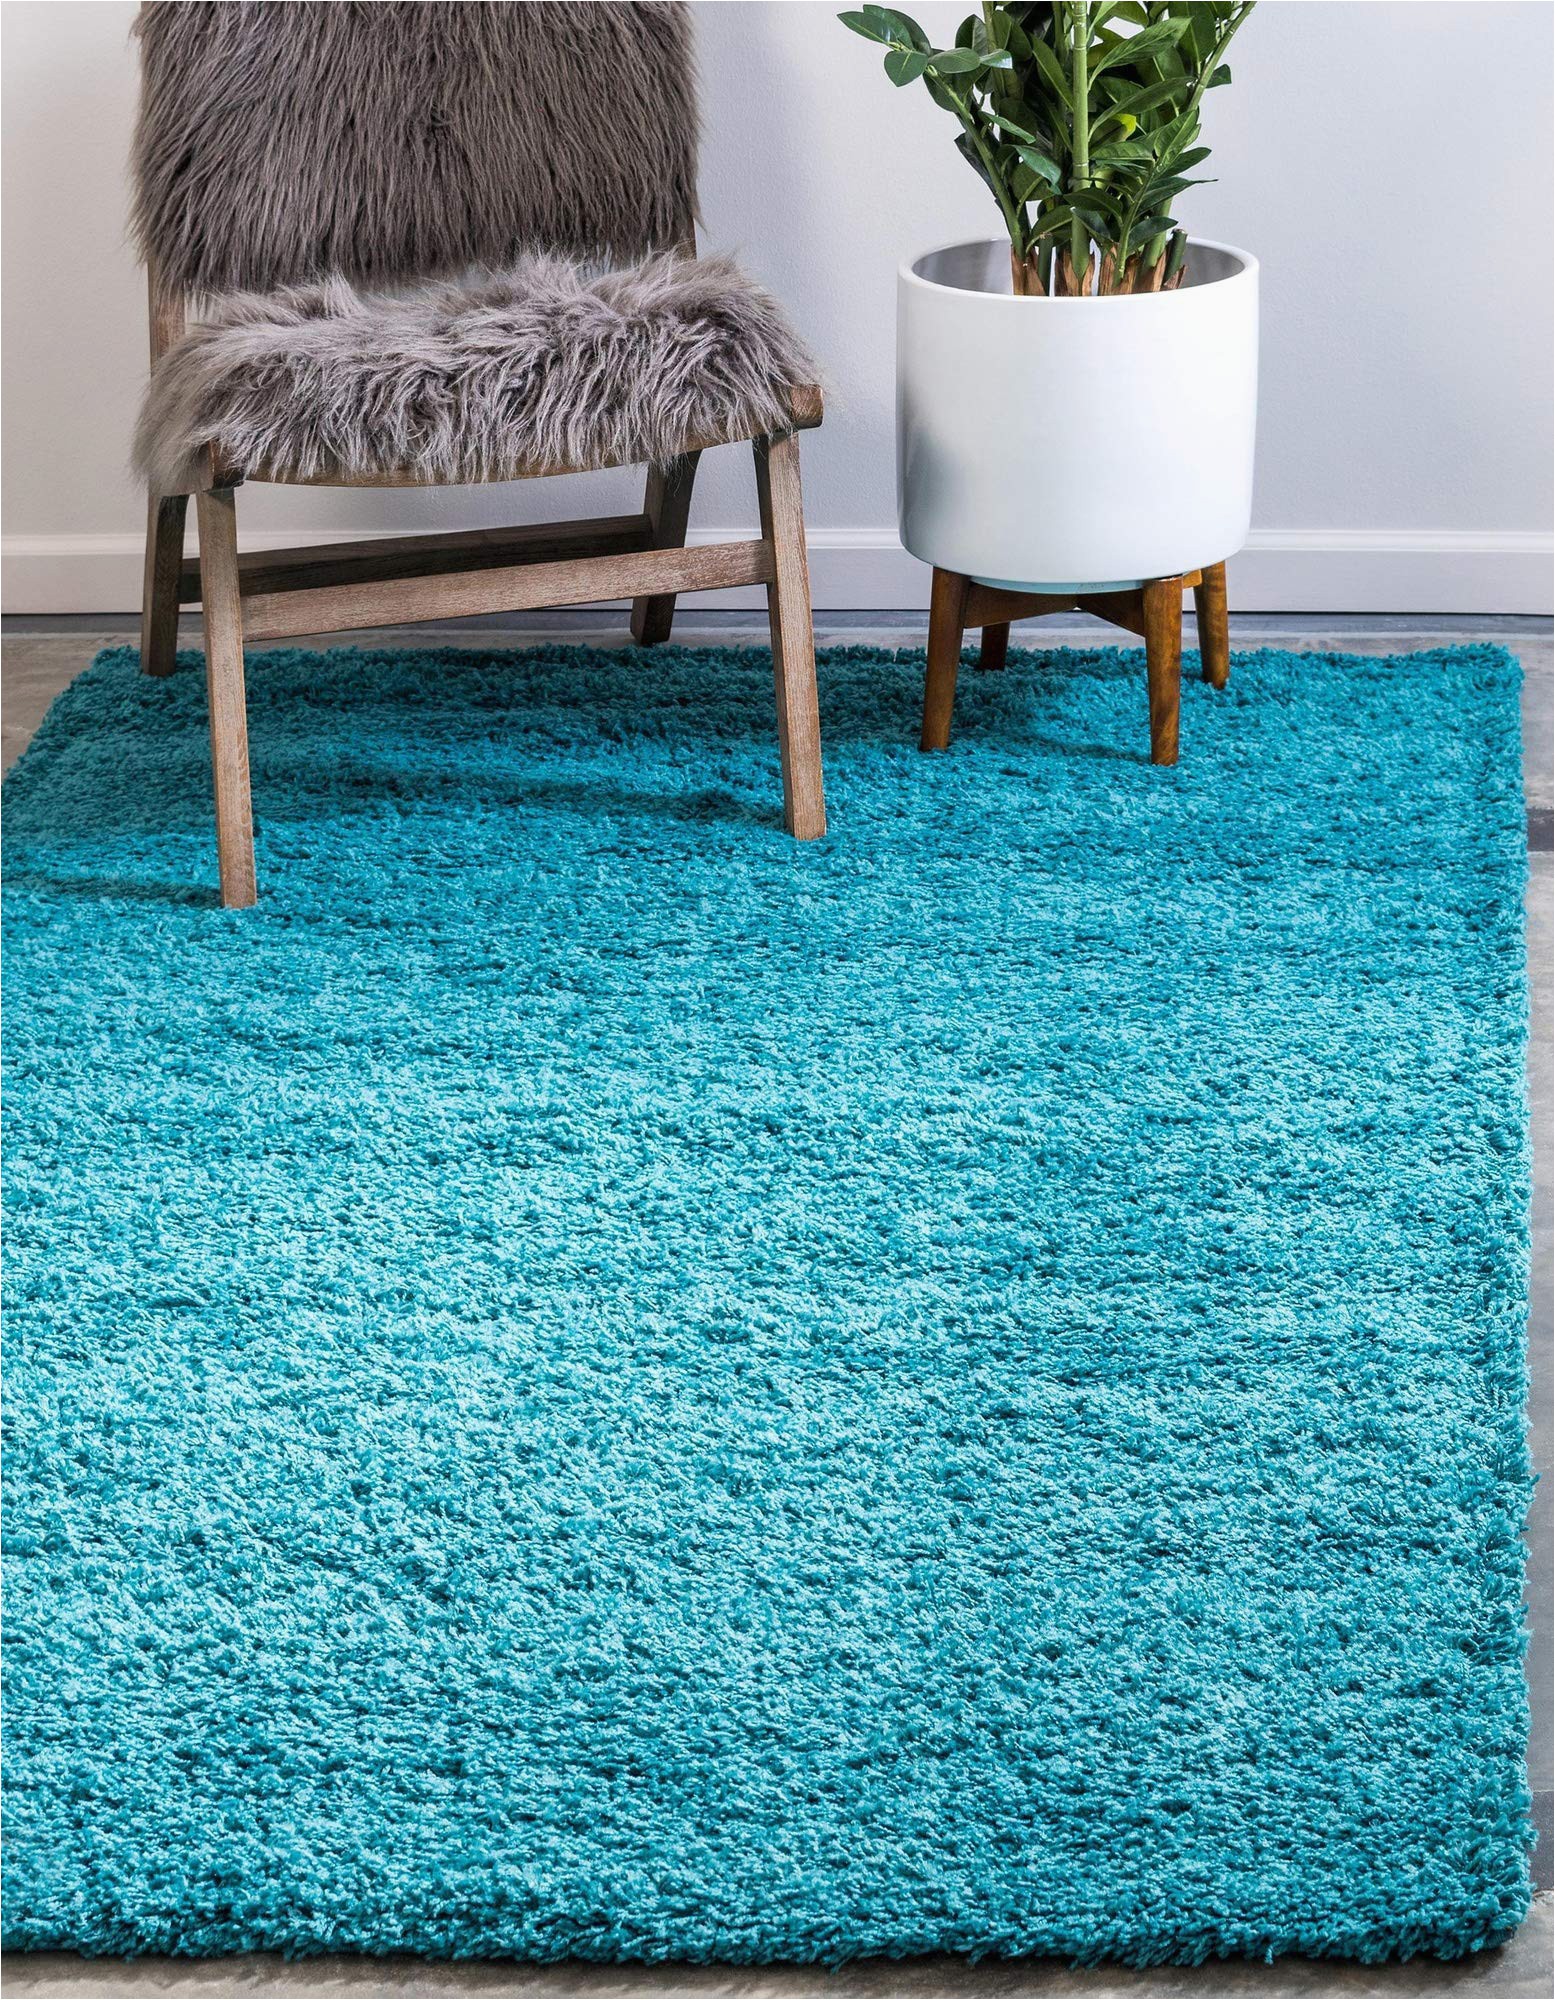 Large Teal Blue area Rugs Bravich Rugmasters Very Large Teal Blue Shaggy Rug 5 Cm Thick Shag Pile soft Shaggy area Rugs Modern Carpet Living Room Bedroom Mats 160×230 Cm 5ft3